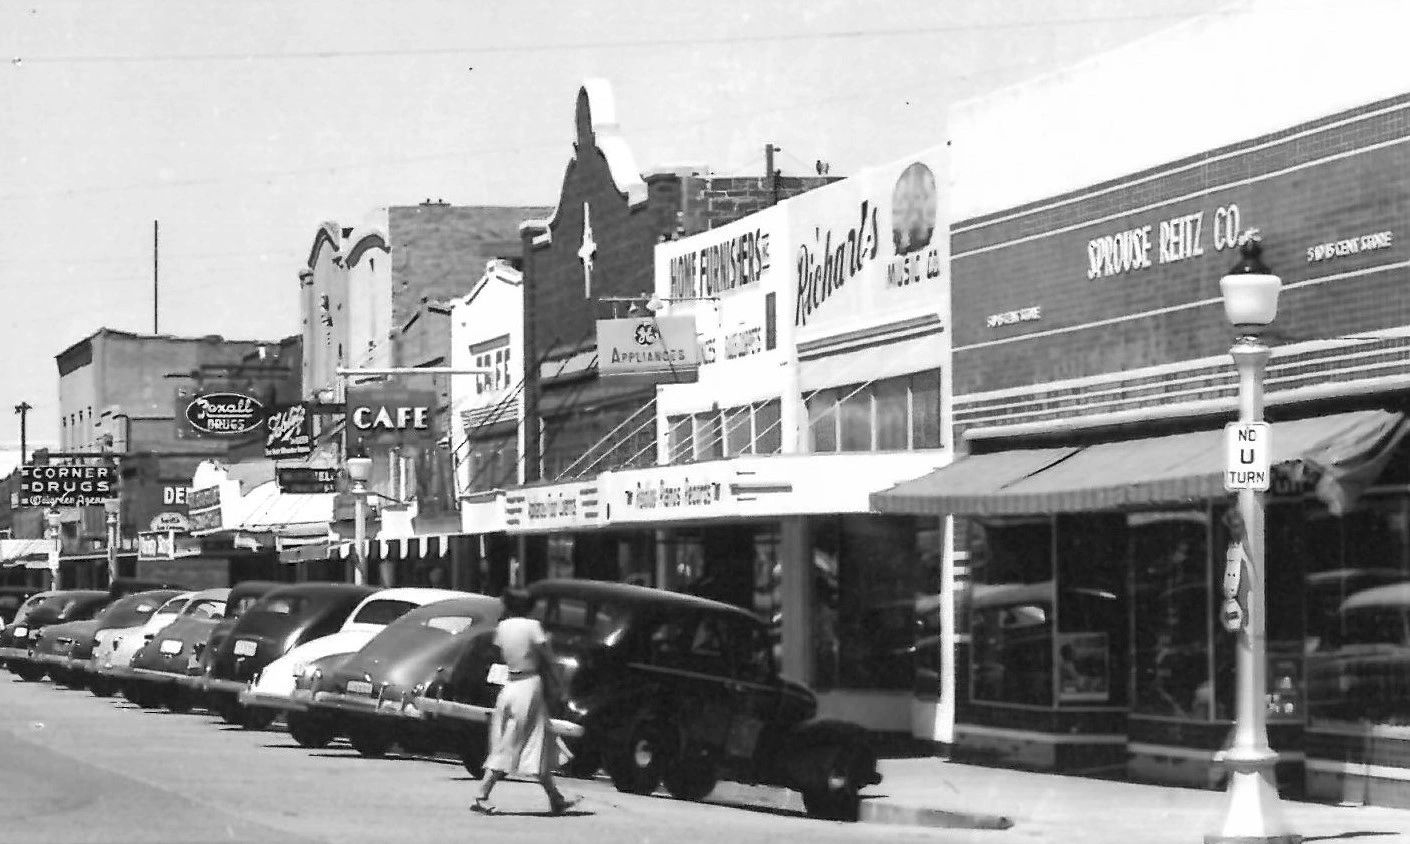 Safford Arizona and Bellmans Department Store in the 1939 by Danny Smith Graham County Supervisor